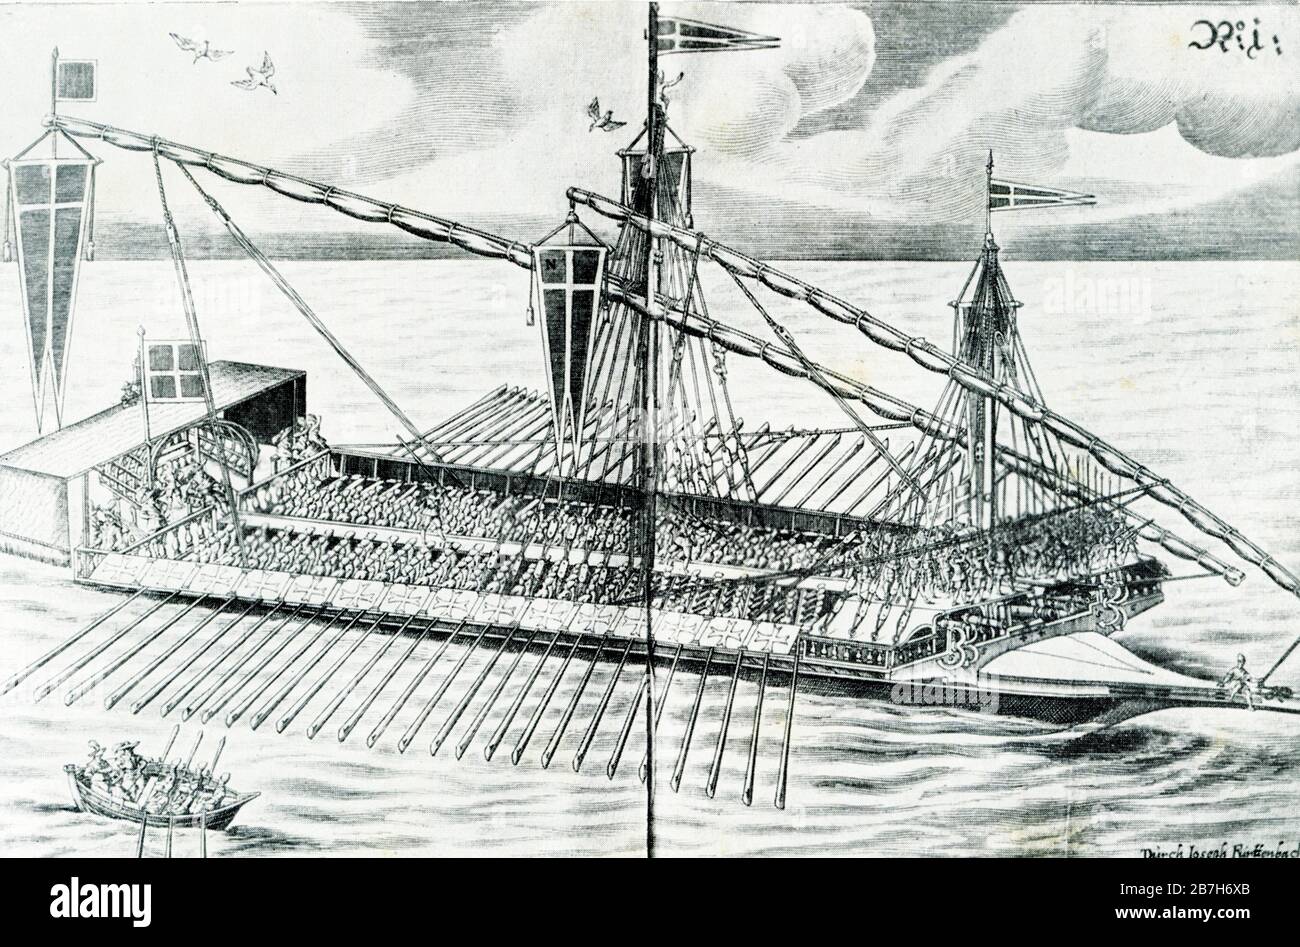 This illustration, dating to the early 1900s, shows an early 17th century galley, a type of ship that is propelled mainly by rowing. The galley is characterized by its long, slender hull, shallow draft, and low freeboard. Virtually all types of galleys had sails. It was chiefly used for warfare, trade, and piracy. Stock Photo